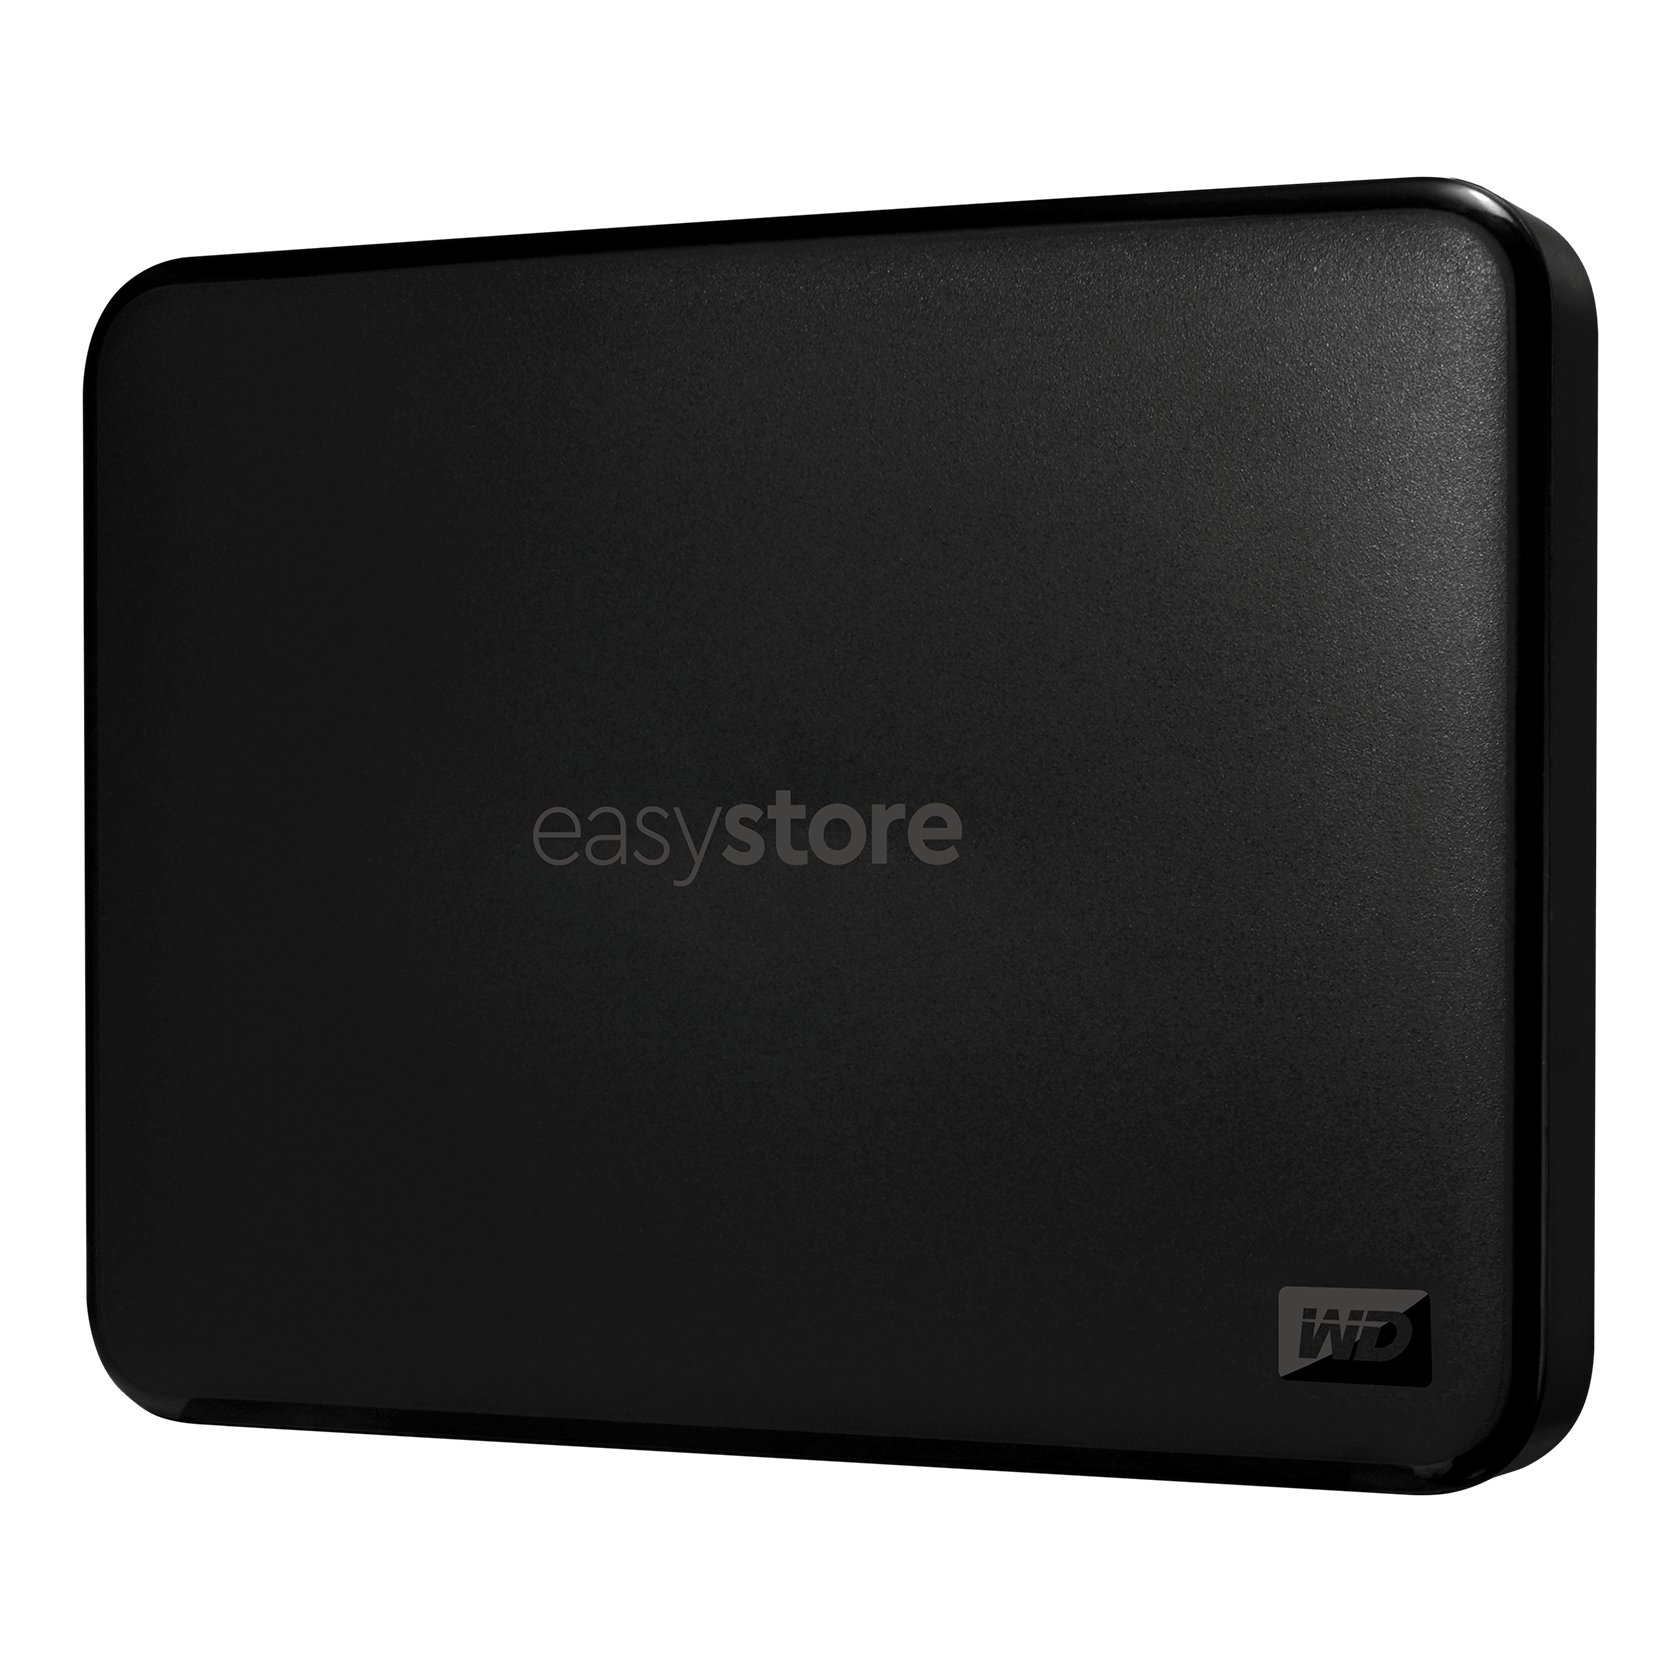 wd easystore quick install guide